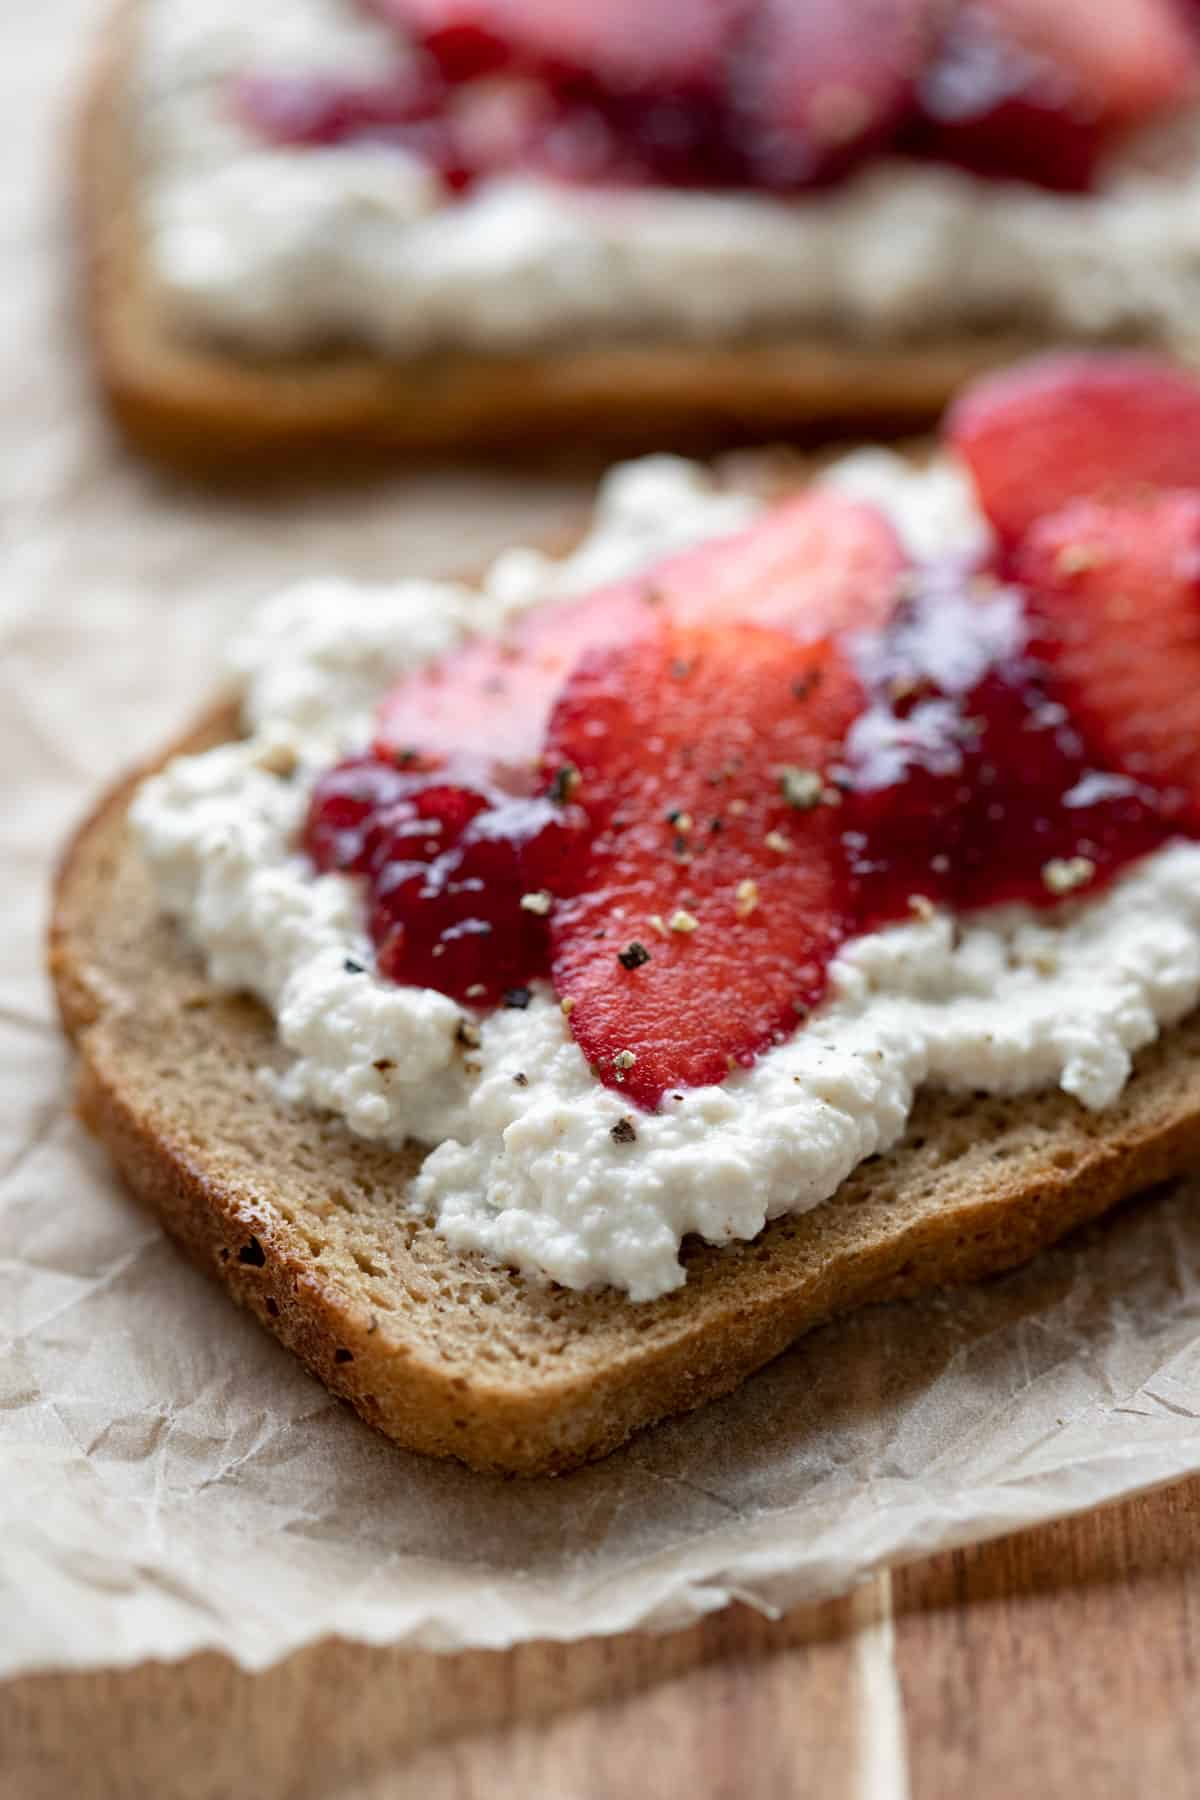 close up of cottage cheese on toast to show the curds and texture.